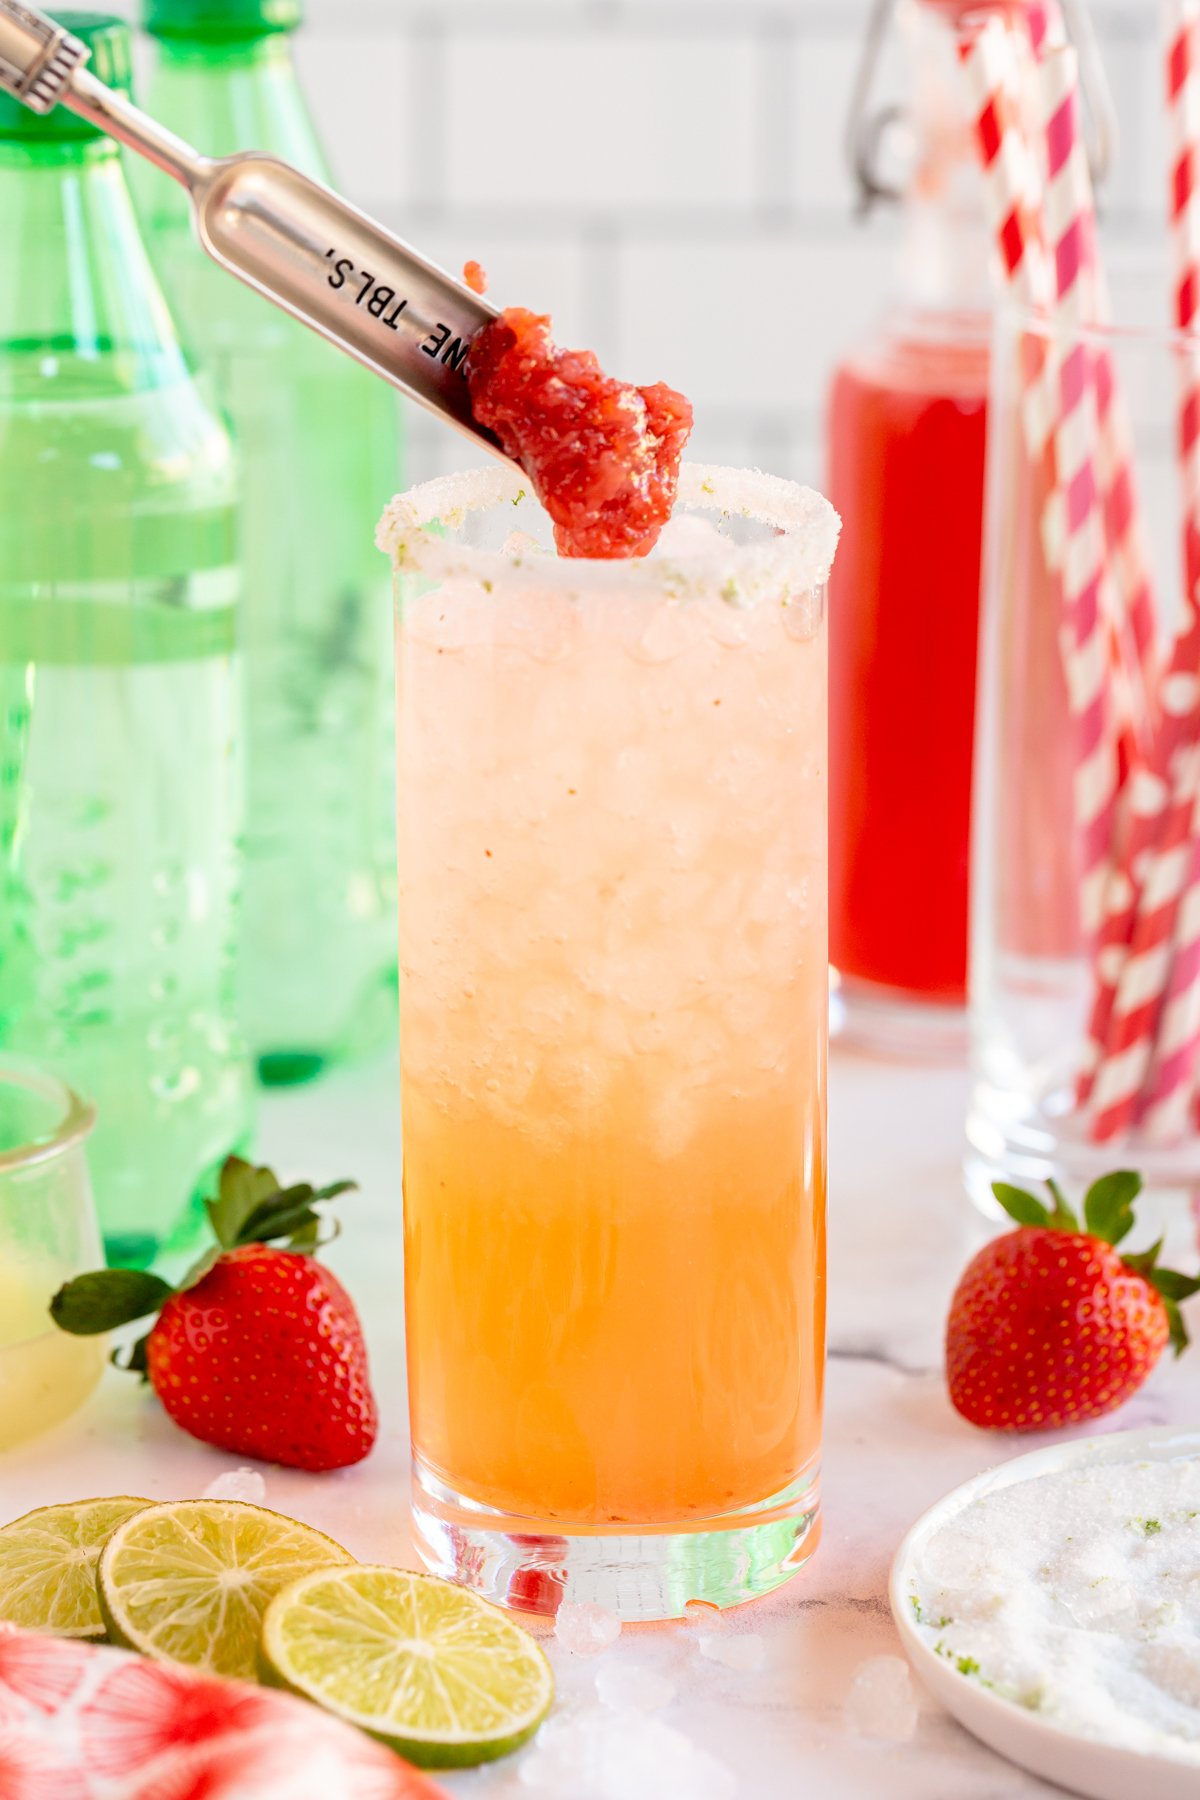 Adding strawberries to a strawberry mocktail